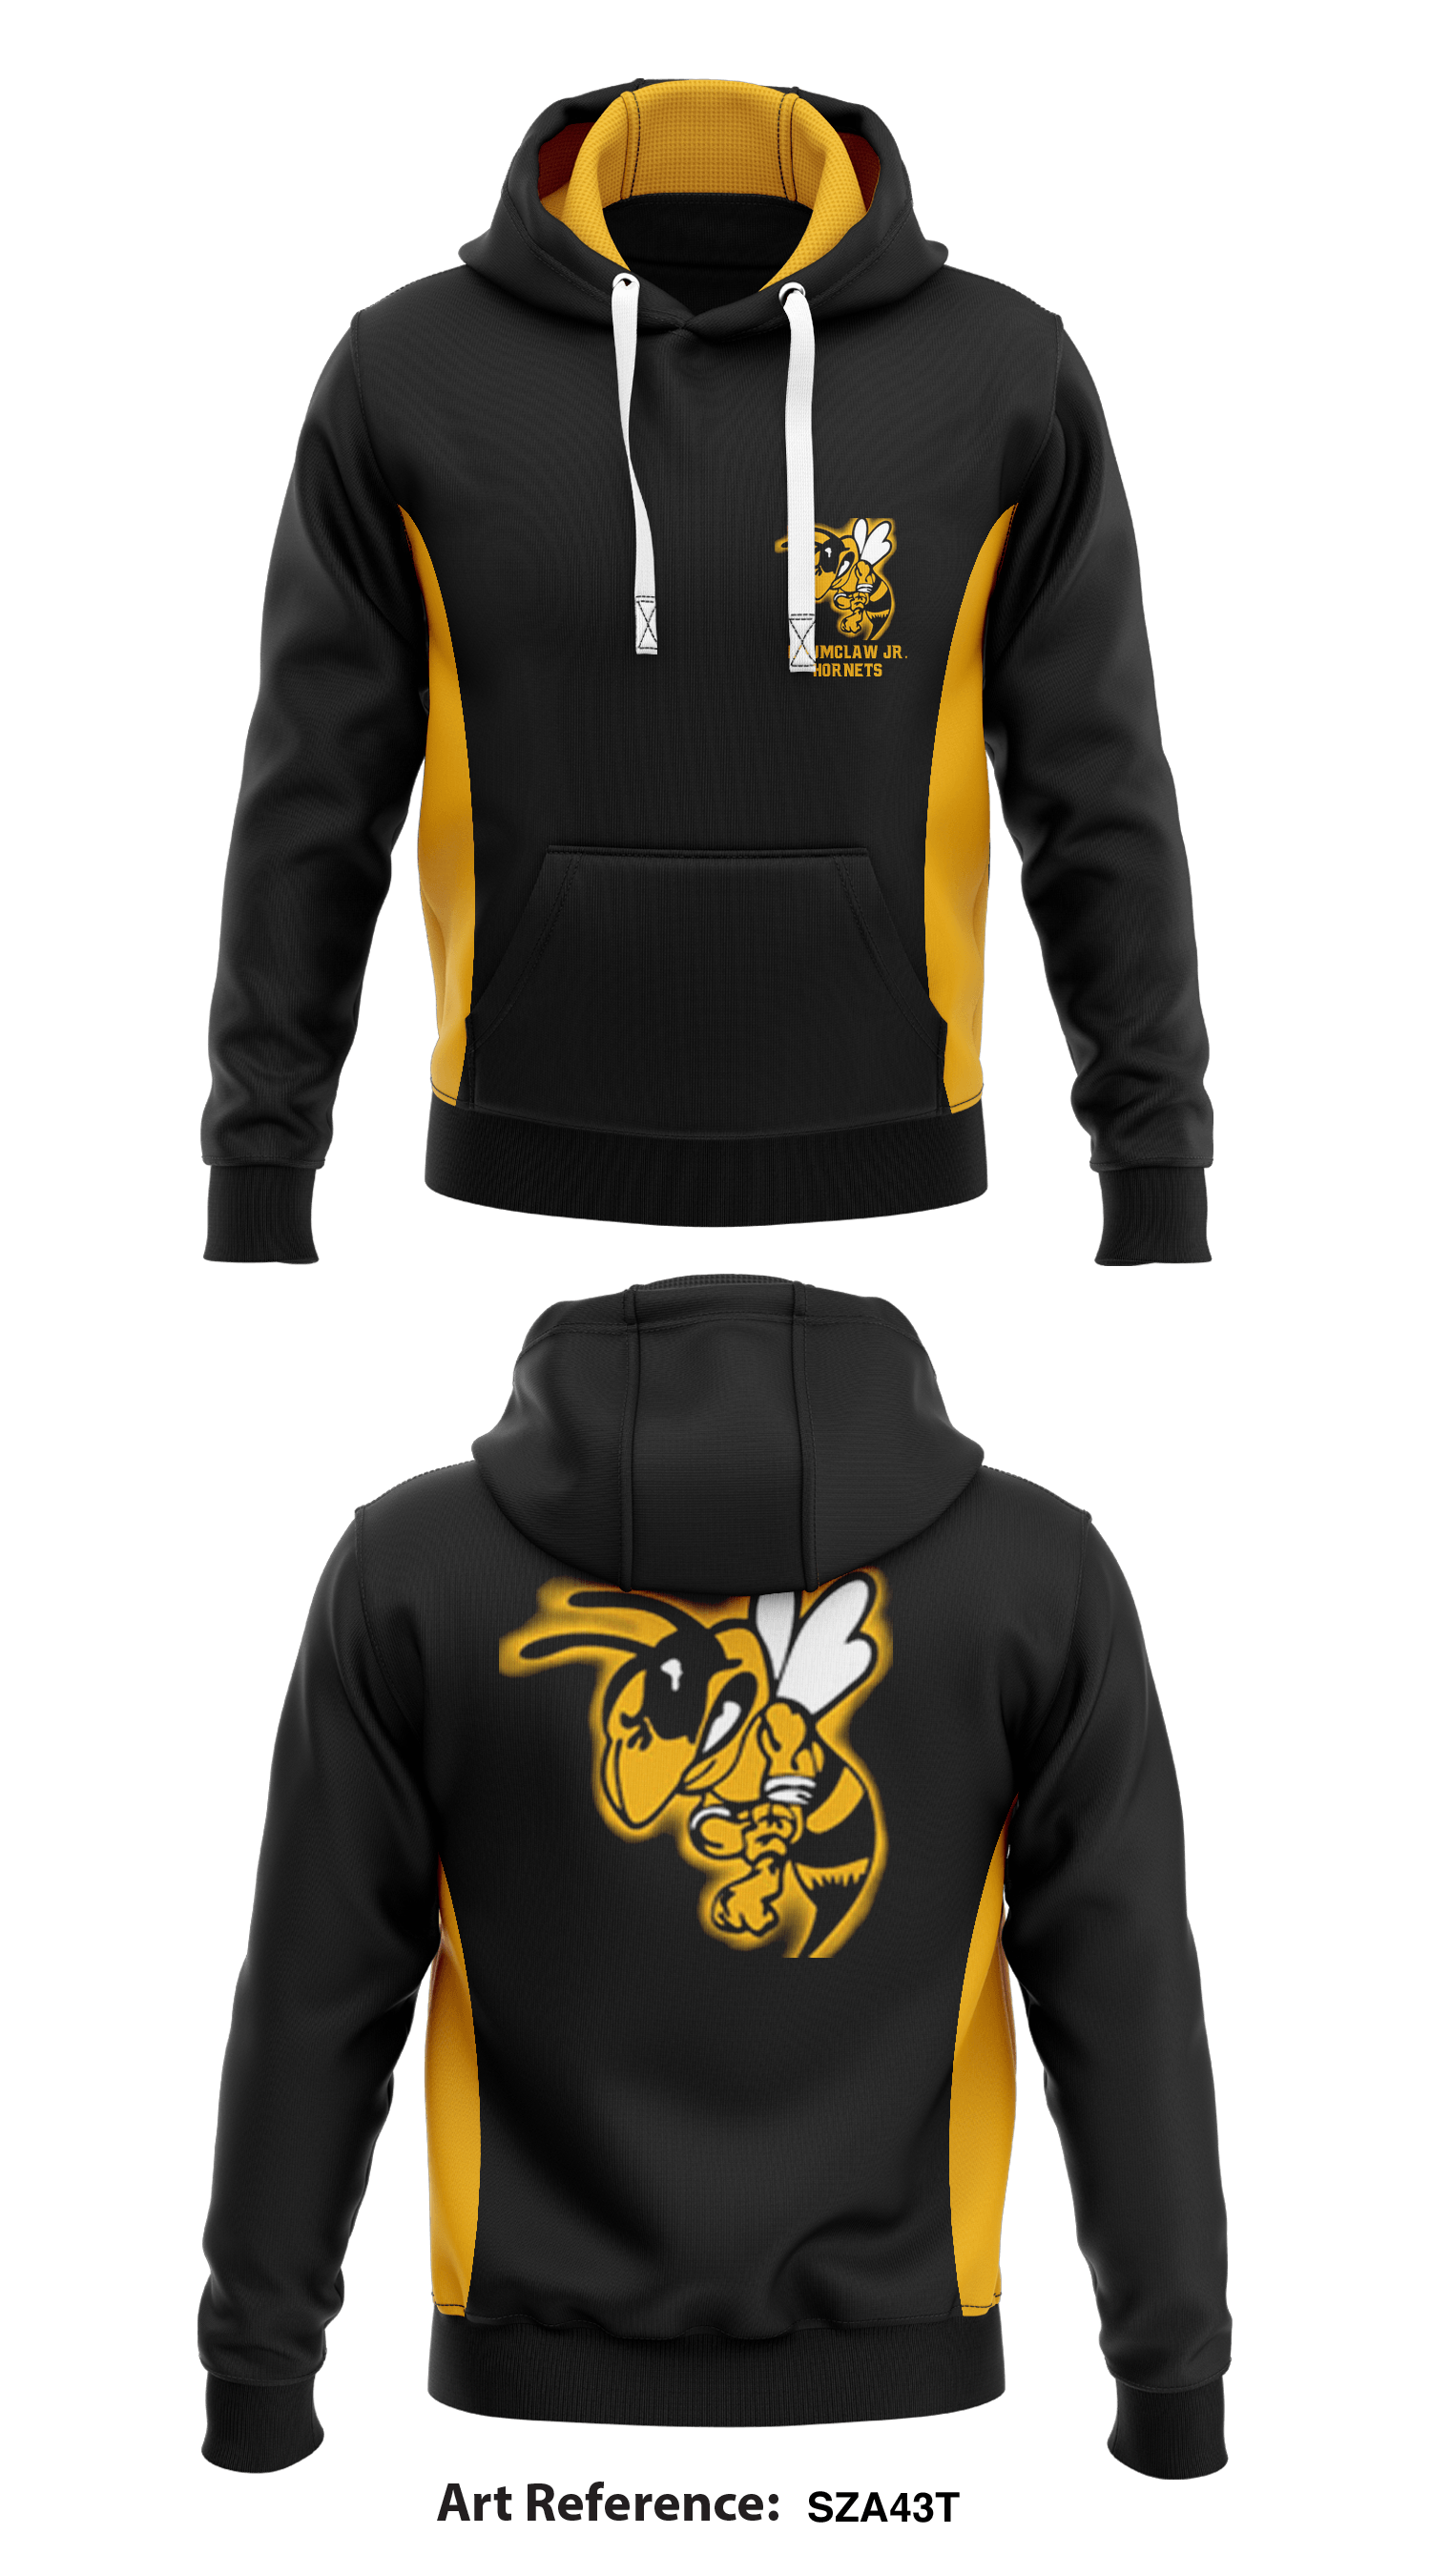 Enumclaw Hornets Apparel Store